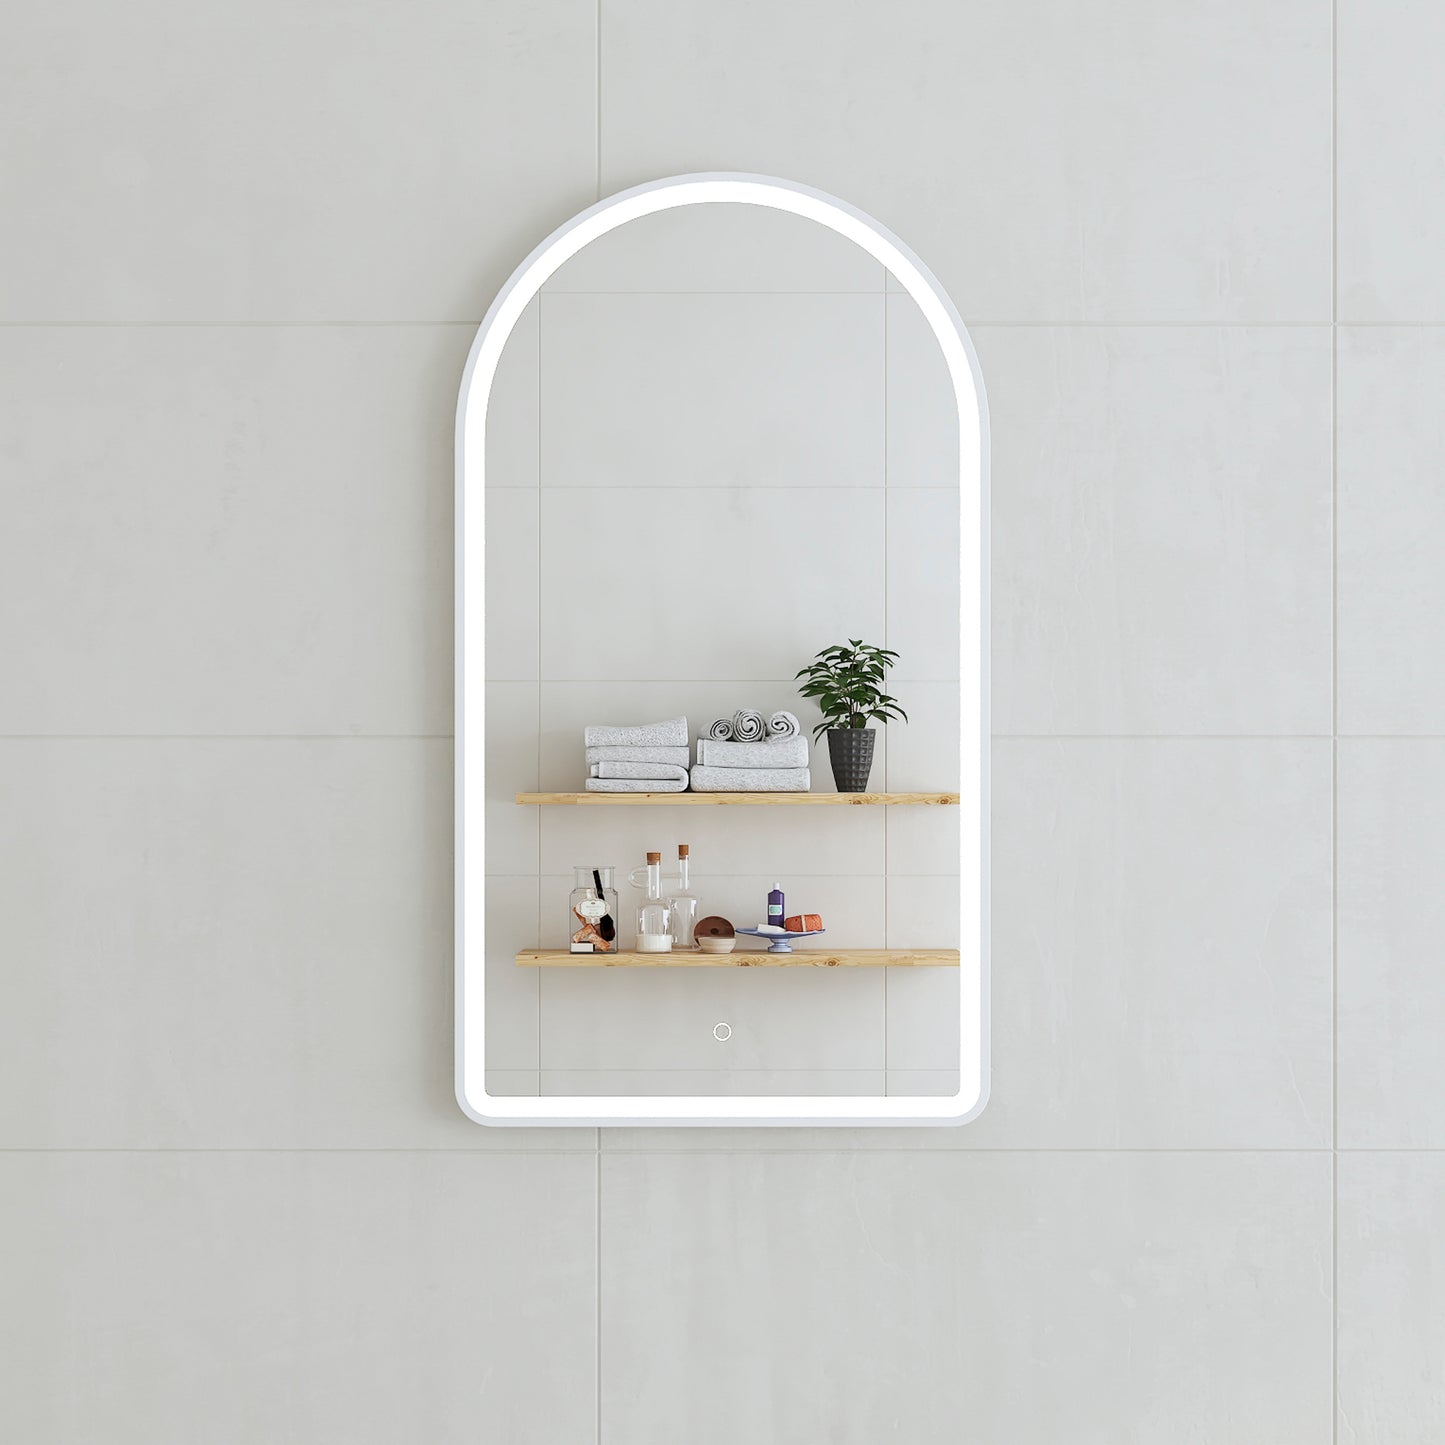 Arco Arch 500mm x 1000mm Frontlit LED Framed Mirror in Matte White with Demister